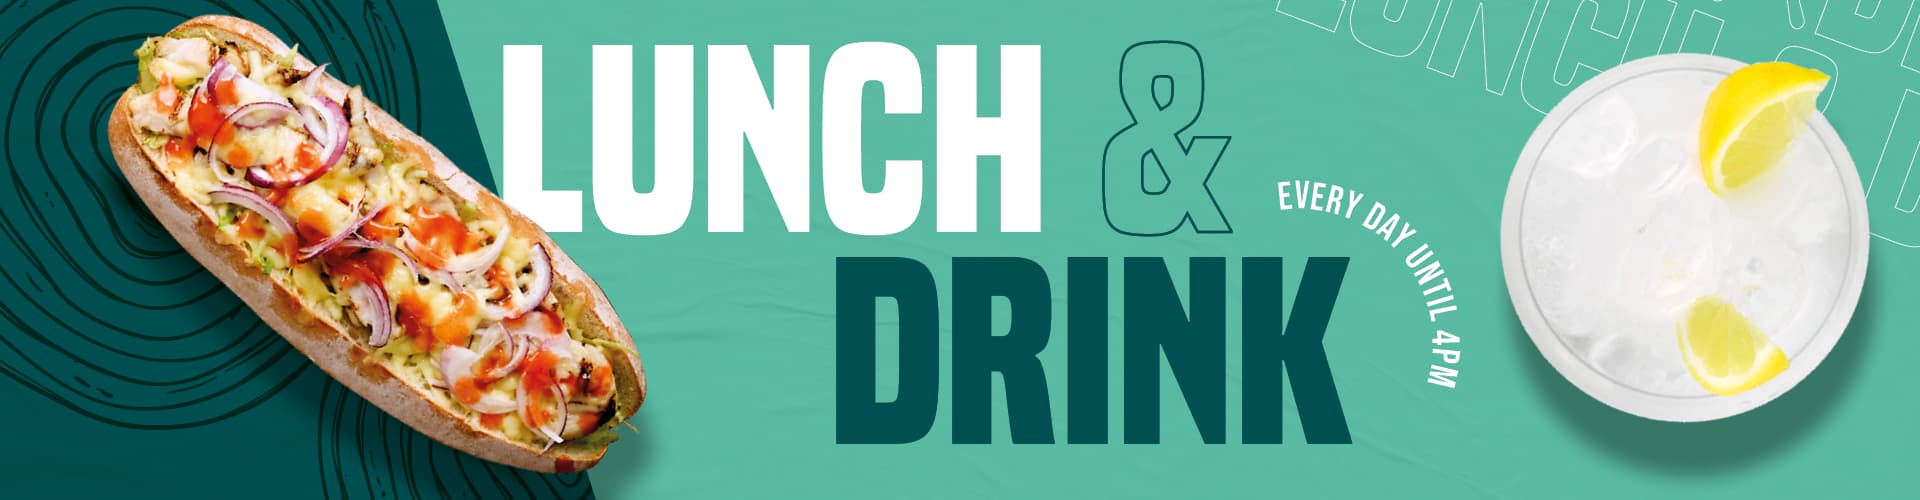 Lunch & Drink - Every Day Until 4pm